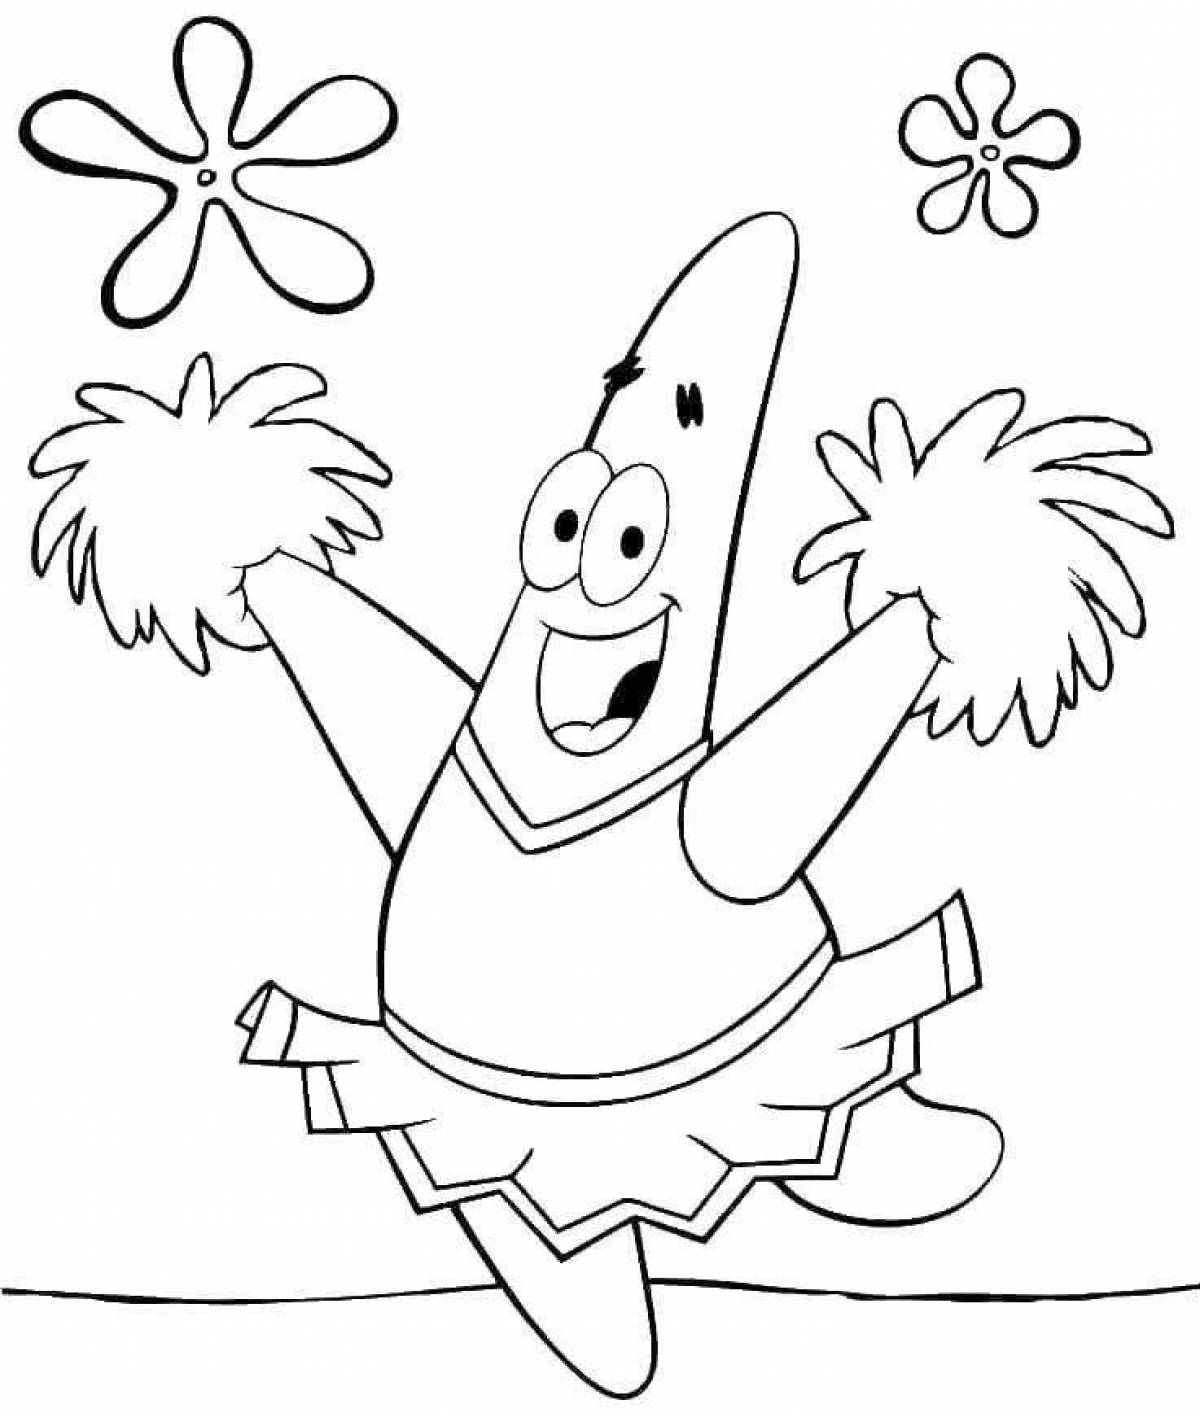 Color-vivacious coloring page for challenge 3 markers